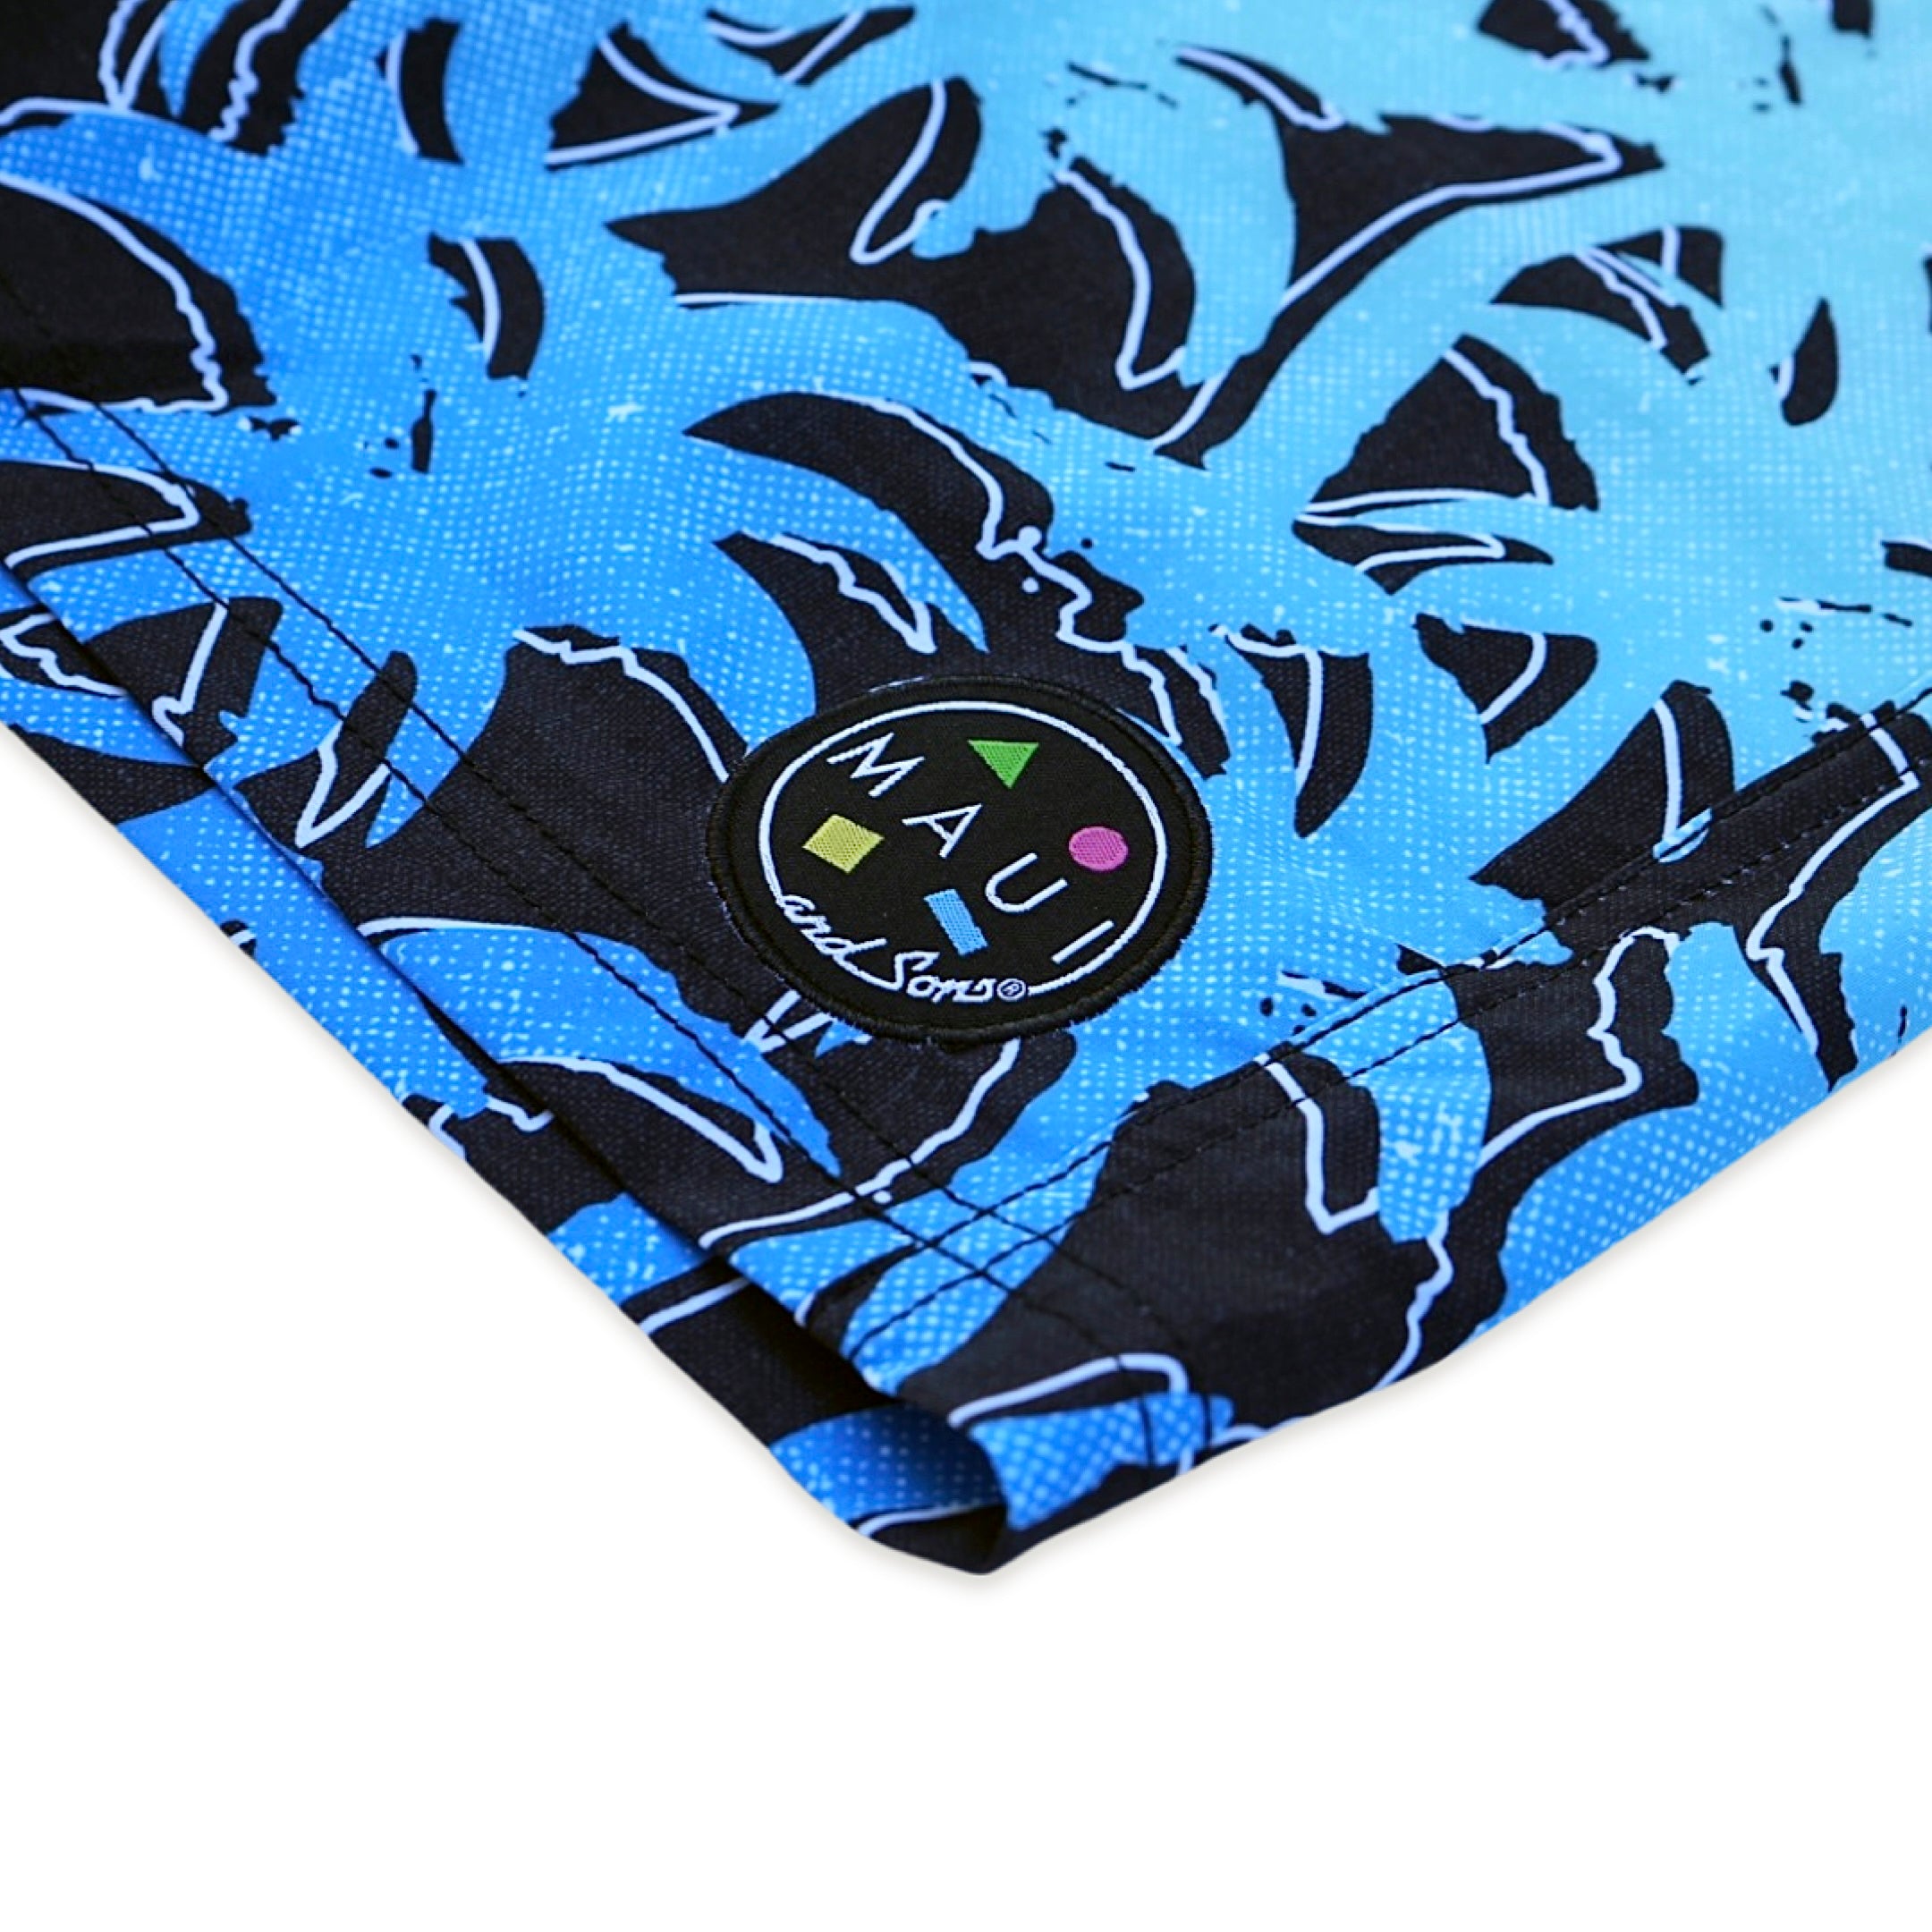 Cali Roots Board Shorts in Blue